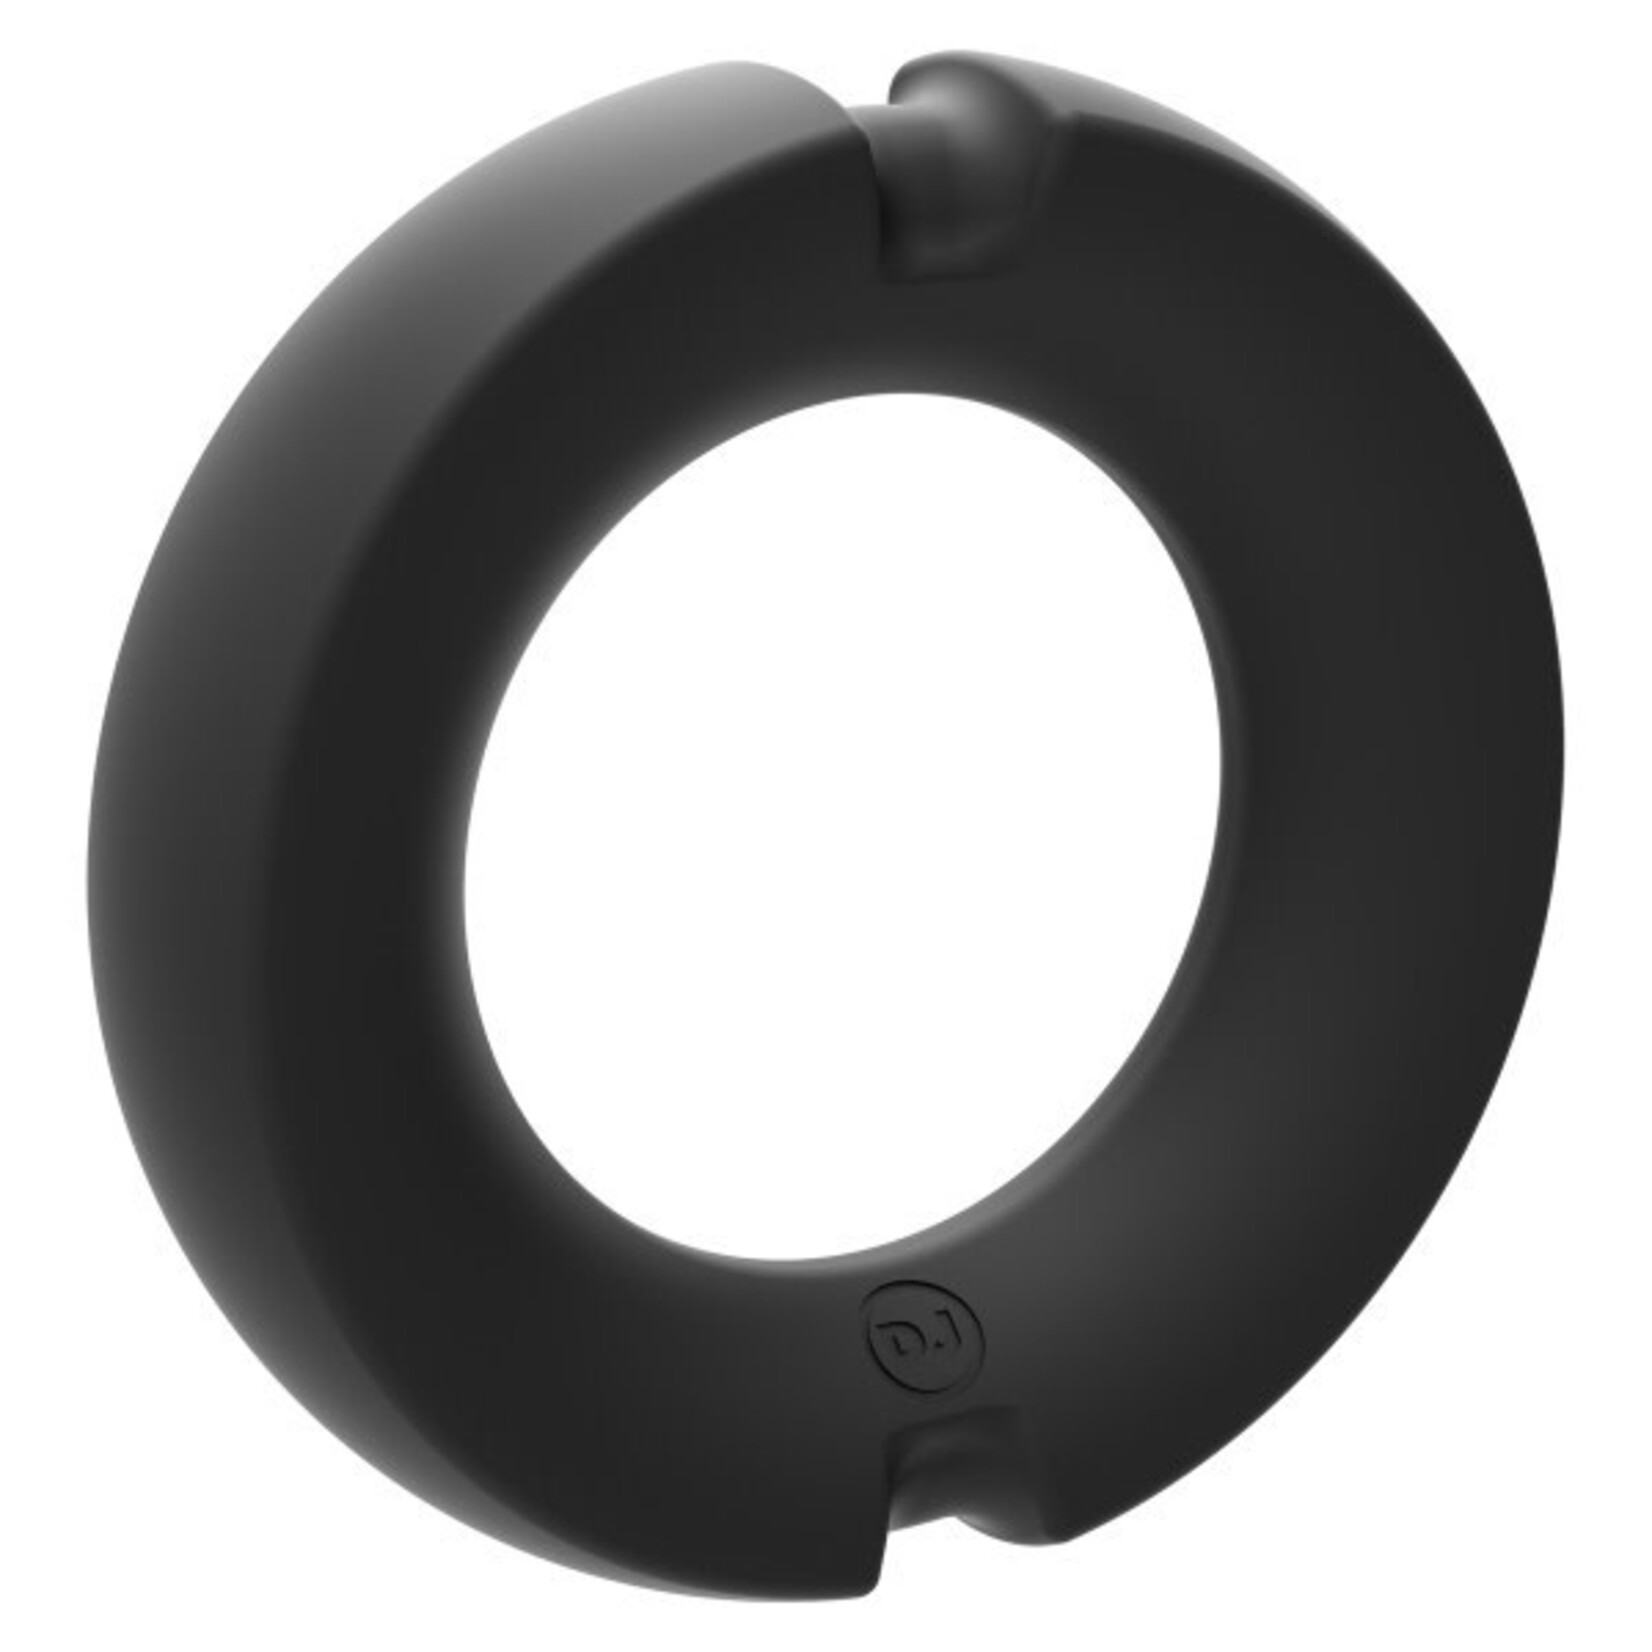 DOC JOHNSON KINK - SILICONE-COVERED METAL COCK RING - 45MM BLACK